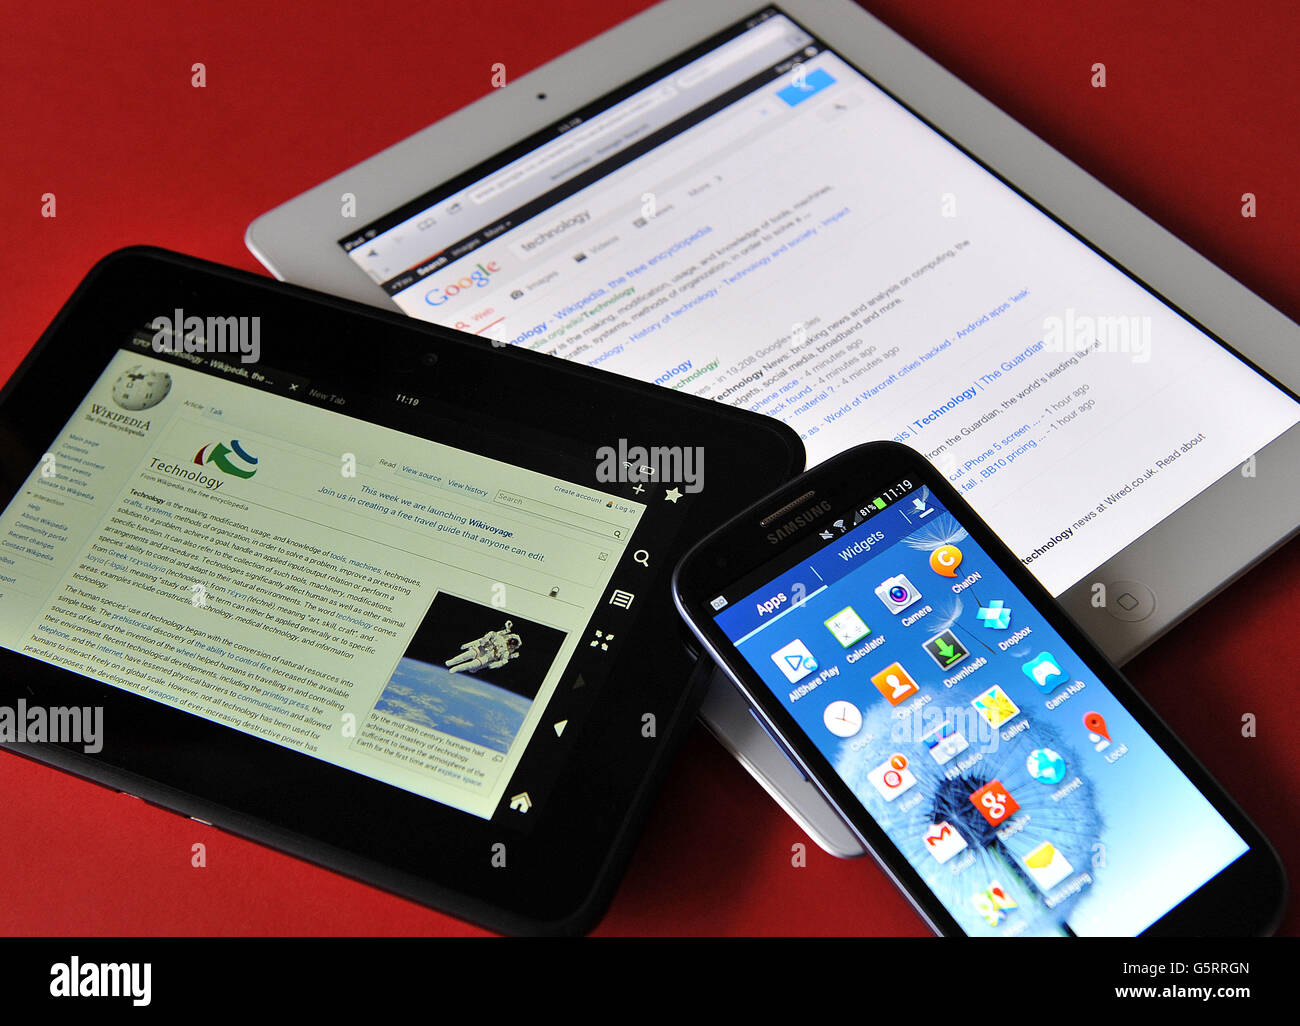 Stock photo of an Apple iPad, a Kindle HD and a Samsung Galaxy S3 android phone. Stock Photo